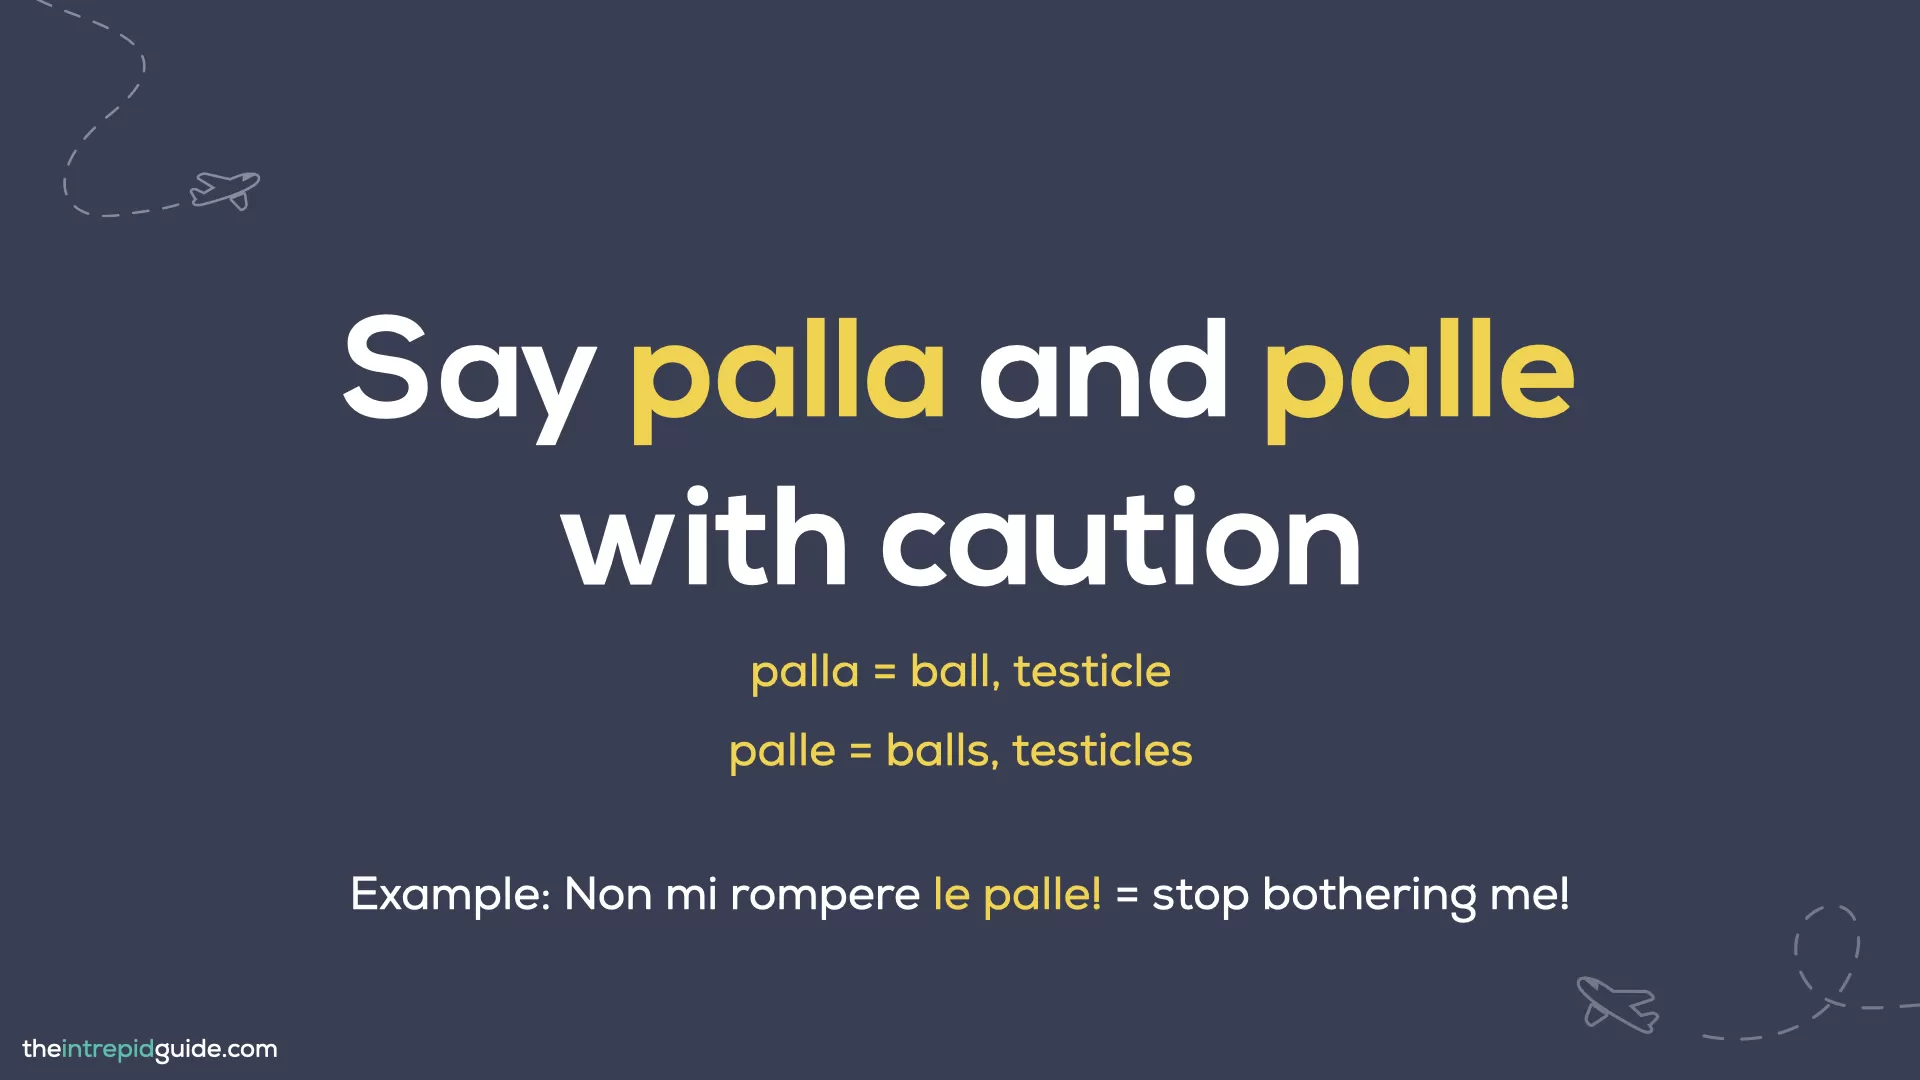 Italian Words You Should Never Mispronounce - Say palla and palle with caution